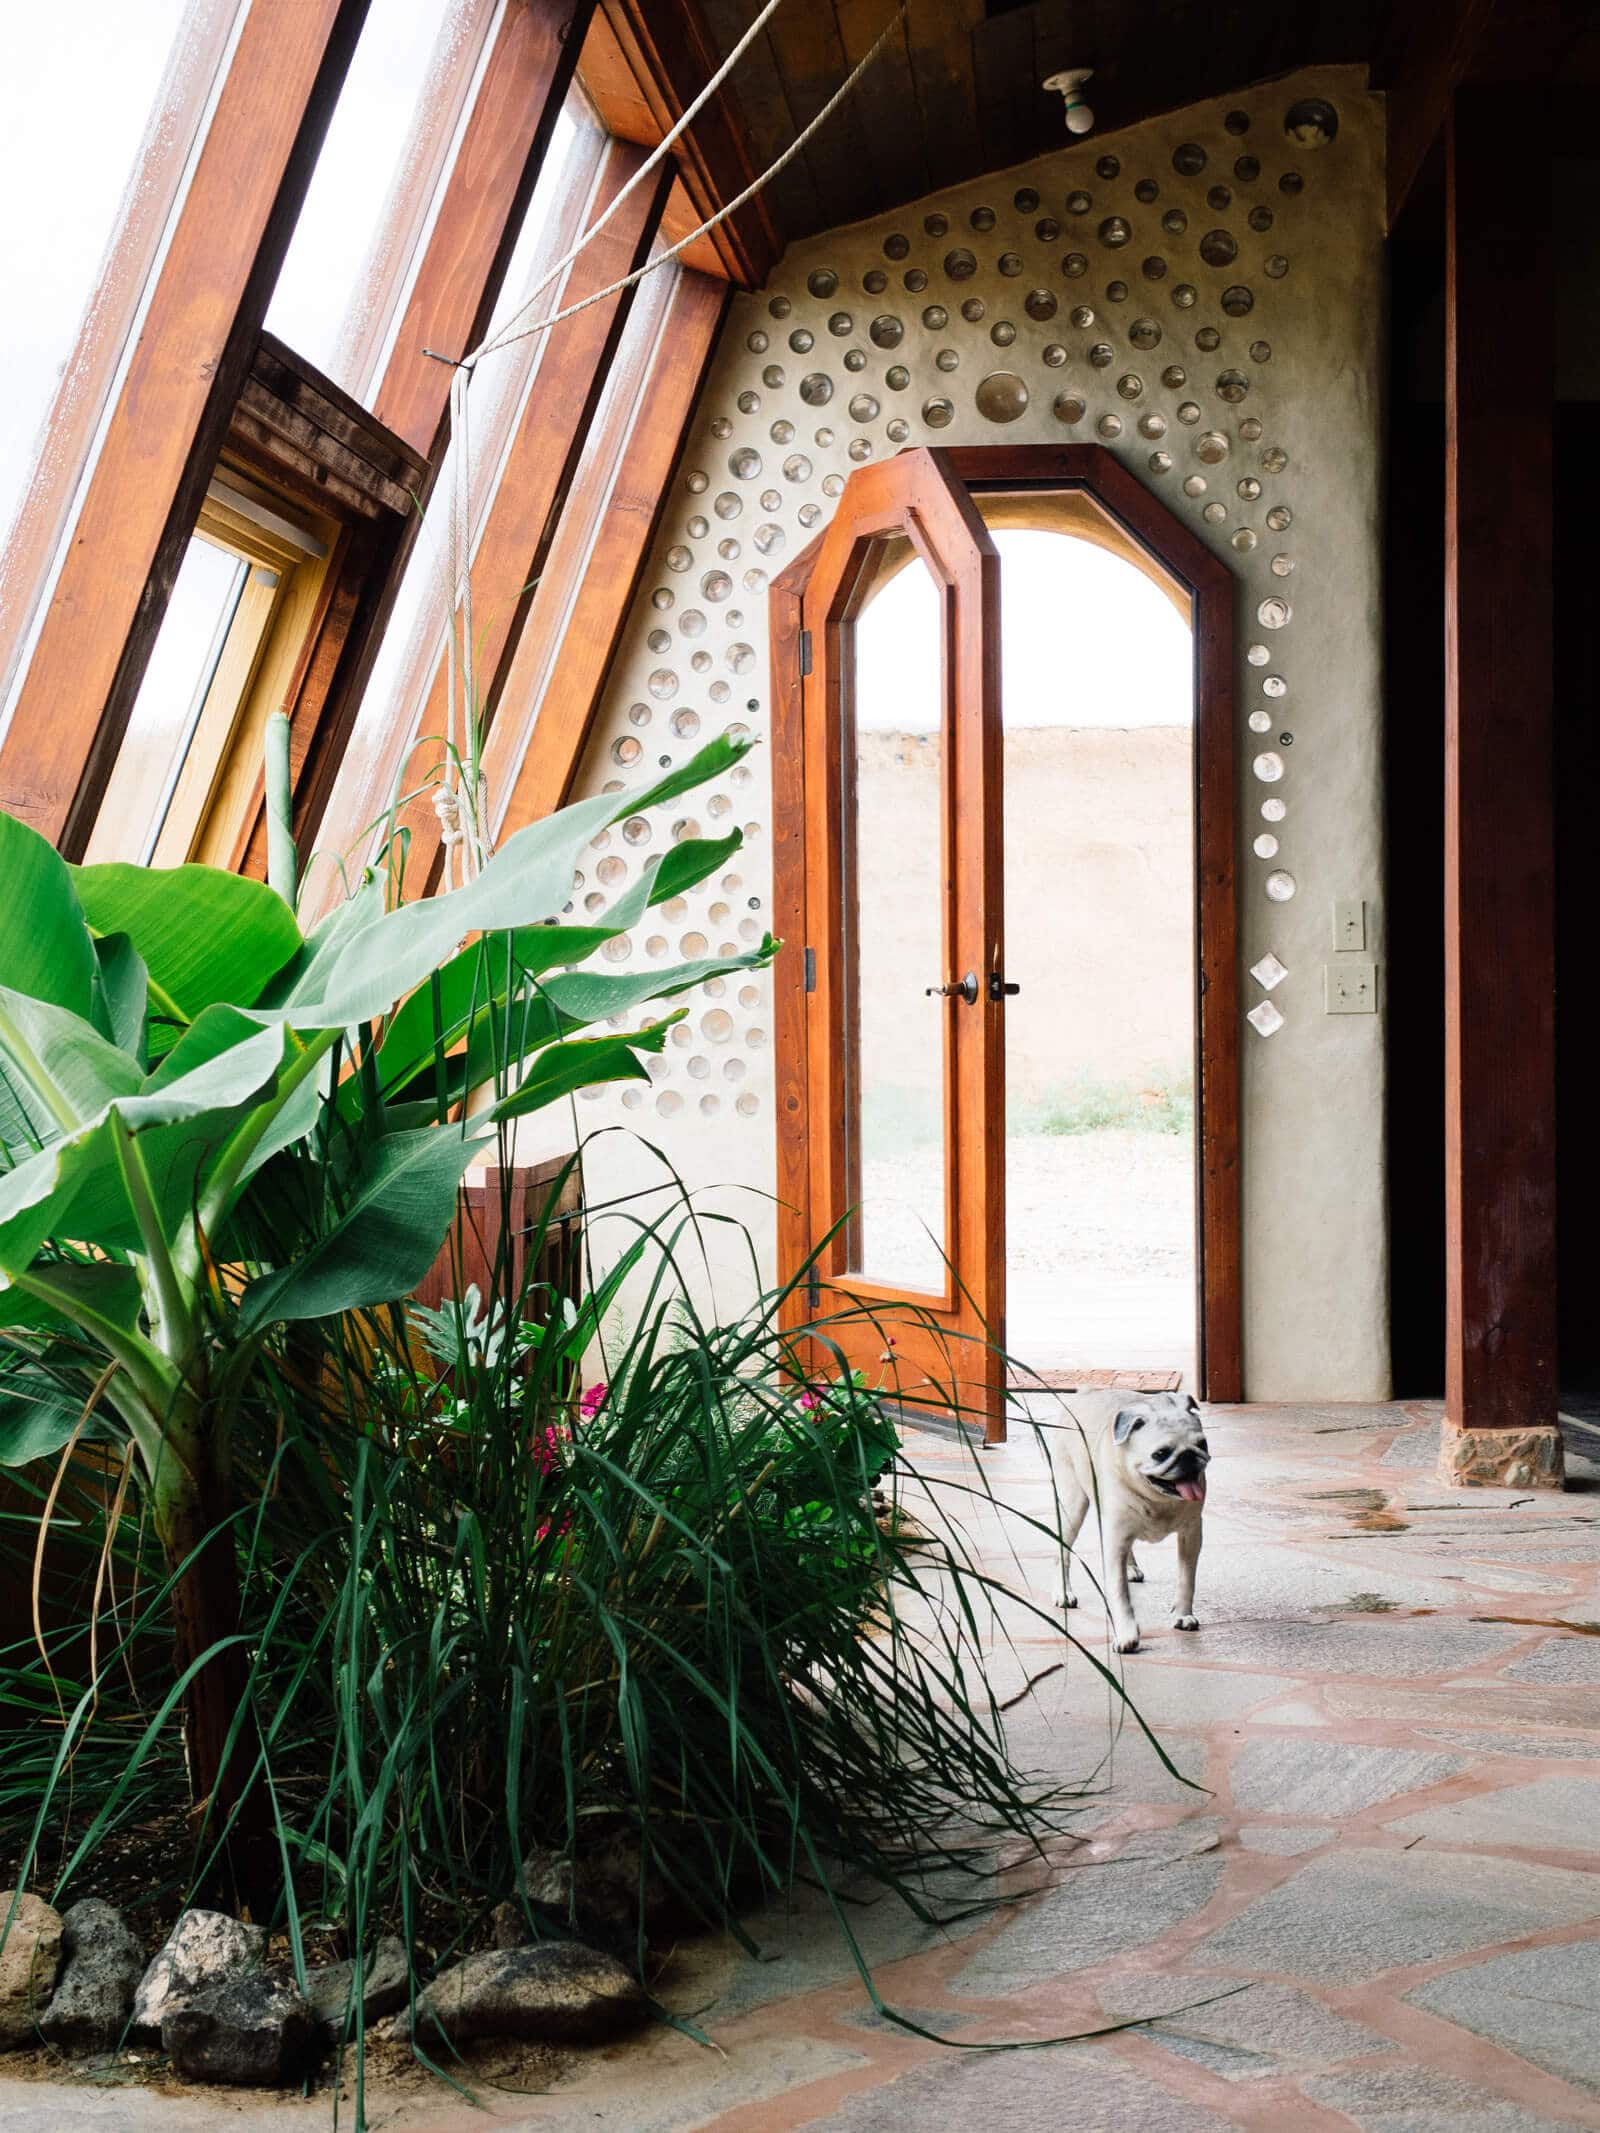 Entering the garage of an Earthship home